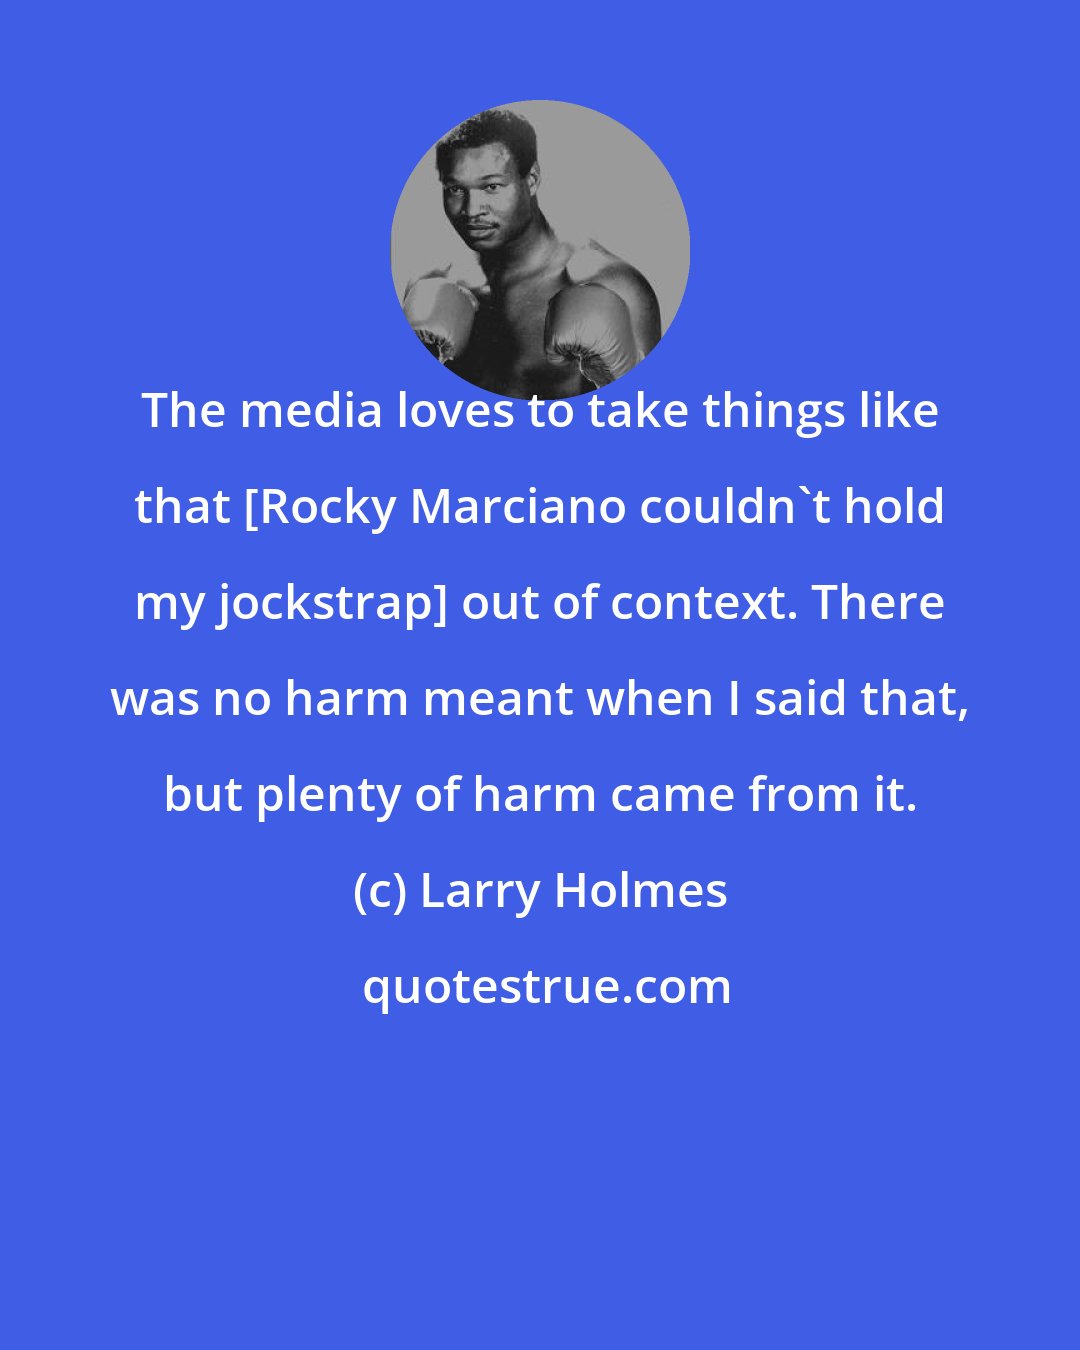 Larry Holmes: The media loves to take things like that [Rocky Marciano couldn't hold my jockstrap] out of context. There was no harm meant when I said that, but plenty of harm came from it.